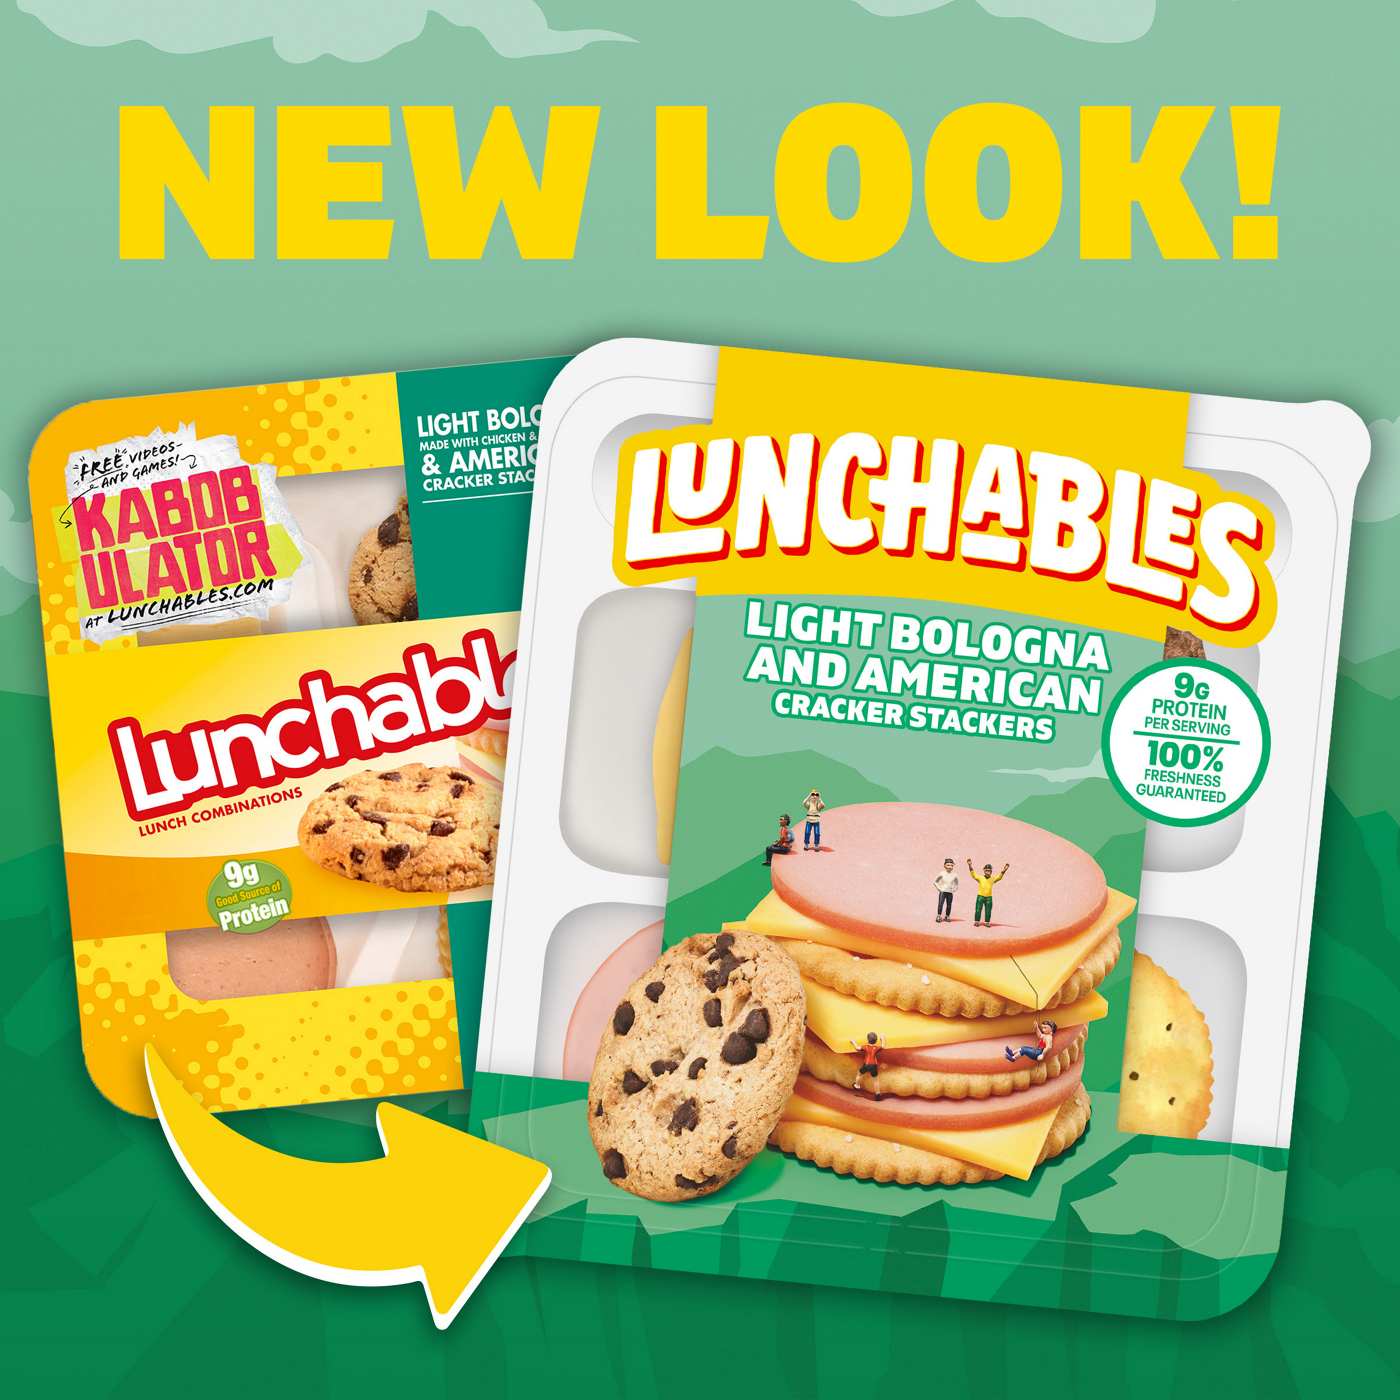 Lunchables Snack Kit - Light Bologna & American Cracker Stackers with Chocolate Chip Cookies; image 4 of 4